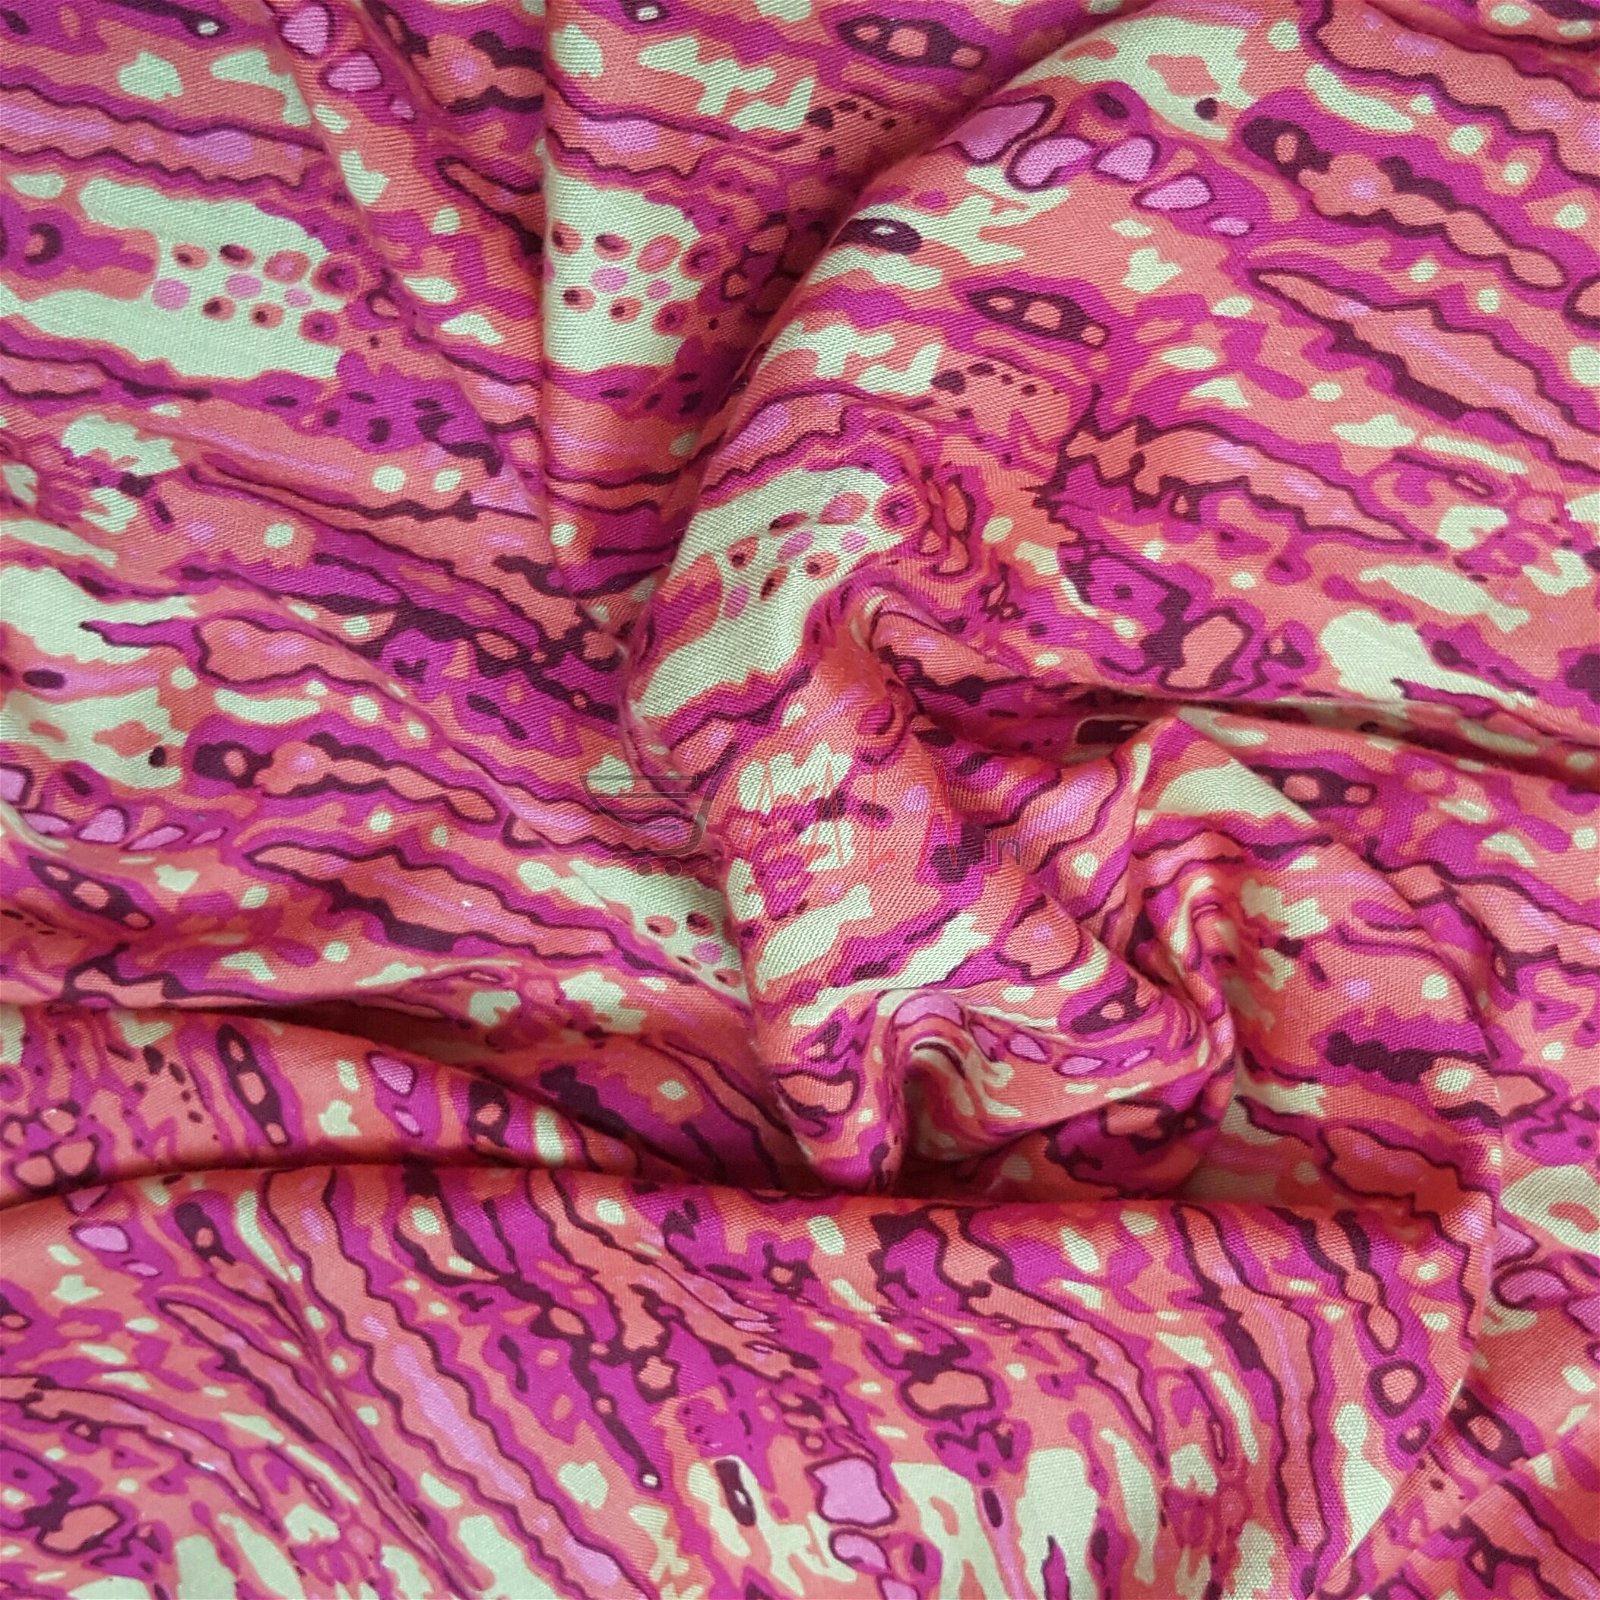 Printed Rayon Cotton 44 Inches Per Metre #2210